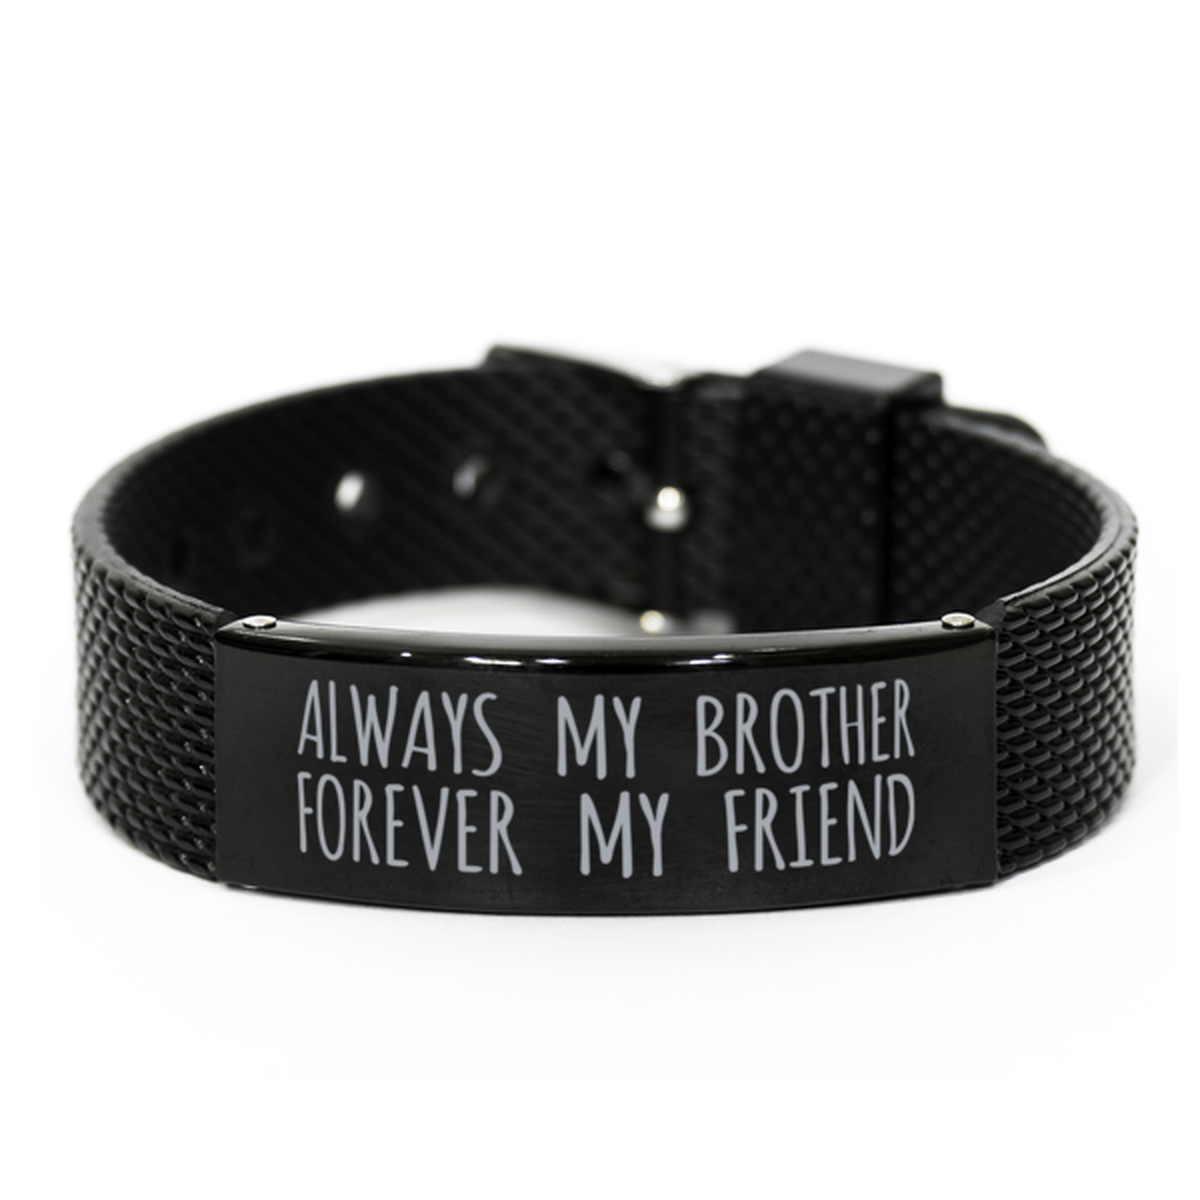 Inspirational Brother Black Shark Mesh Bracelet, Always My Brother Forever My Friend, Best Birthday Gifts for Family Friends